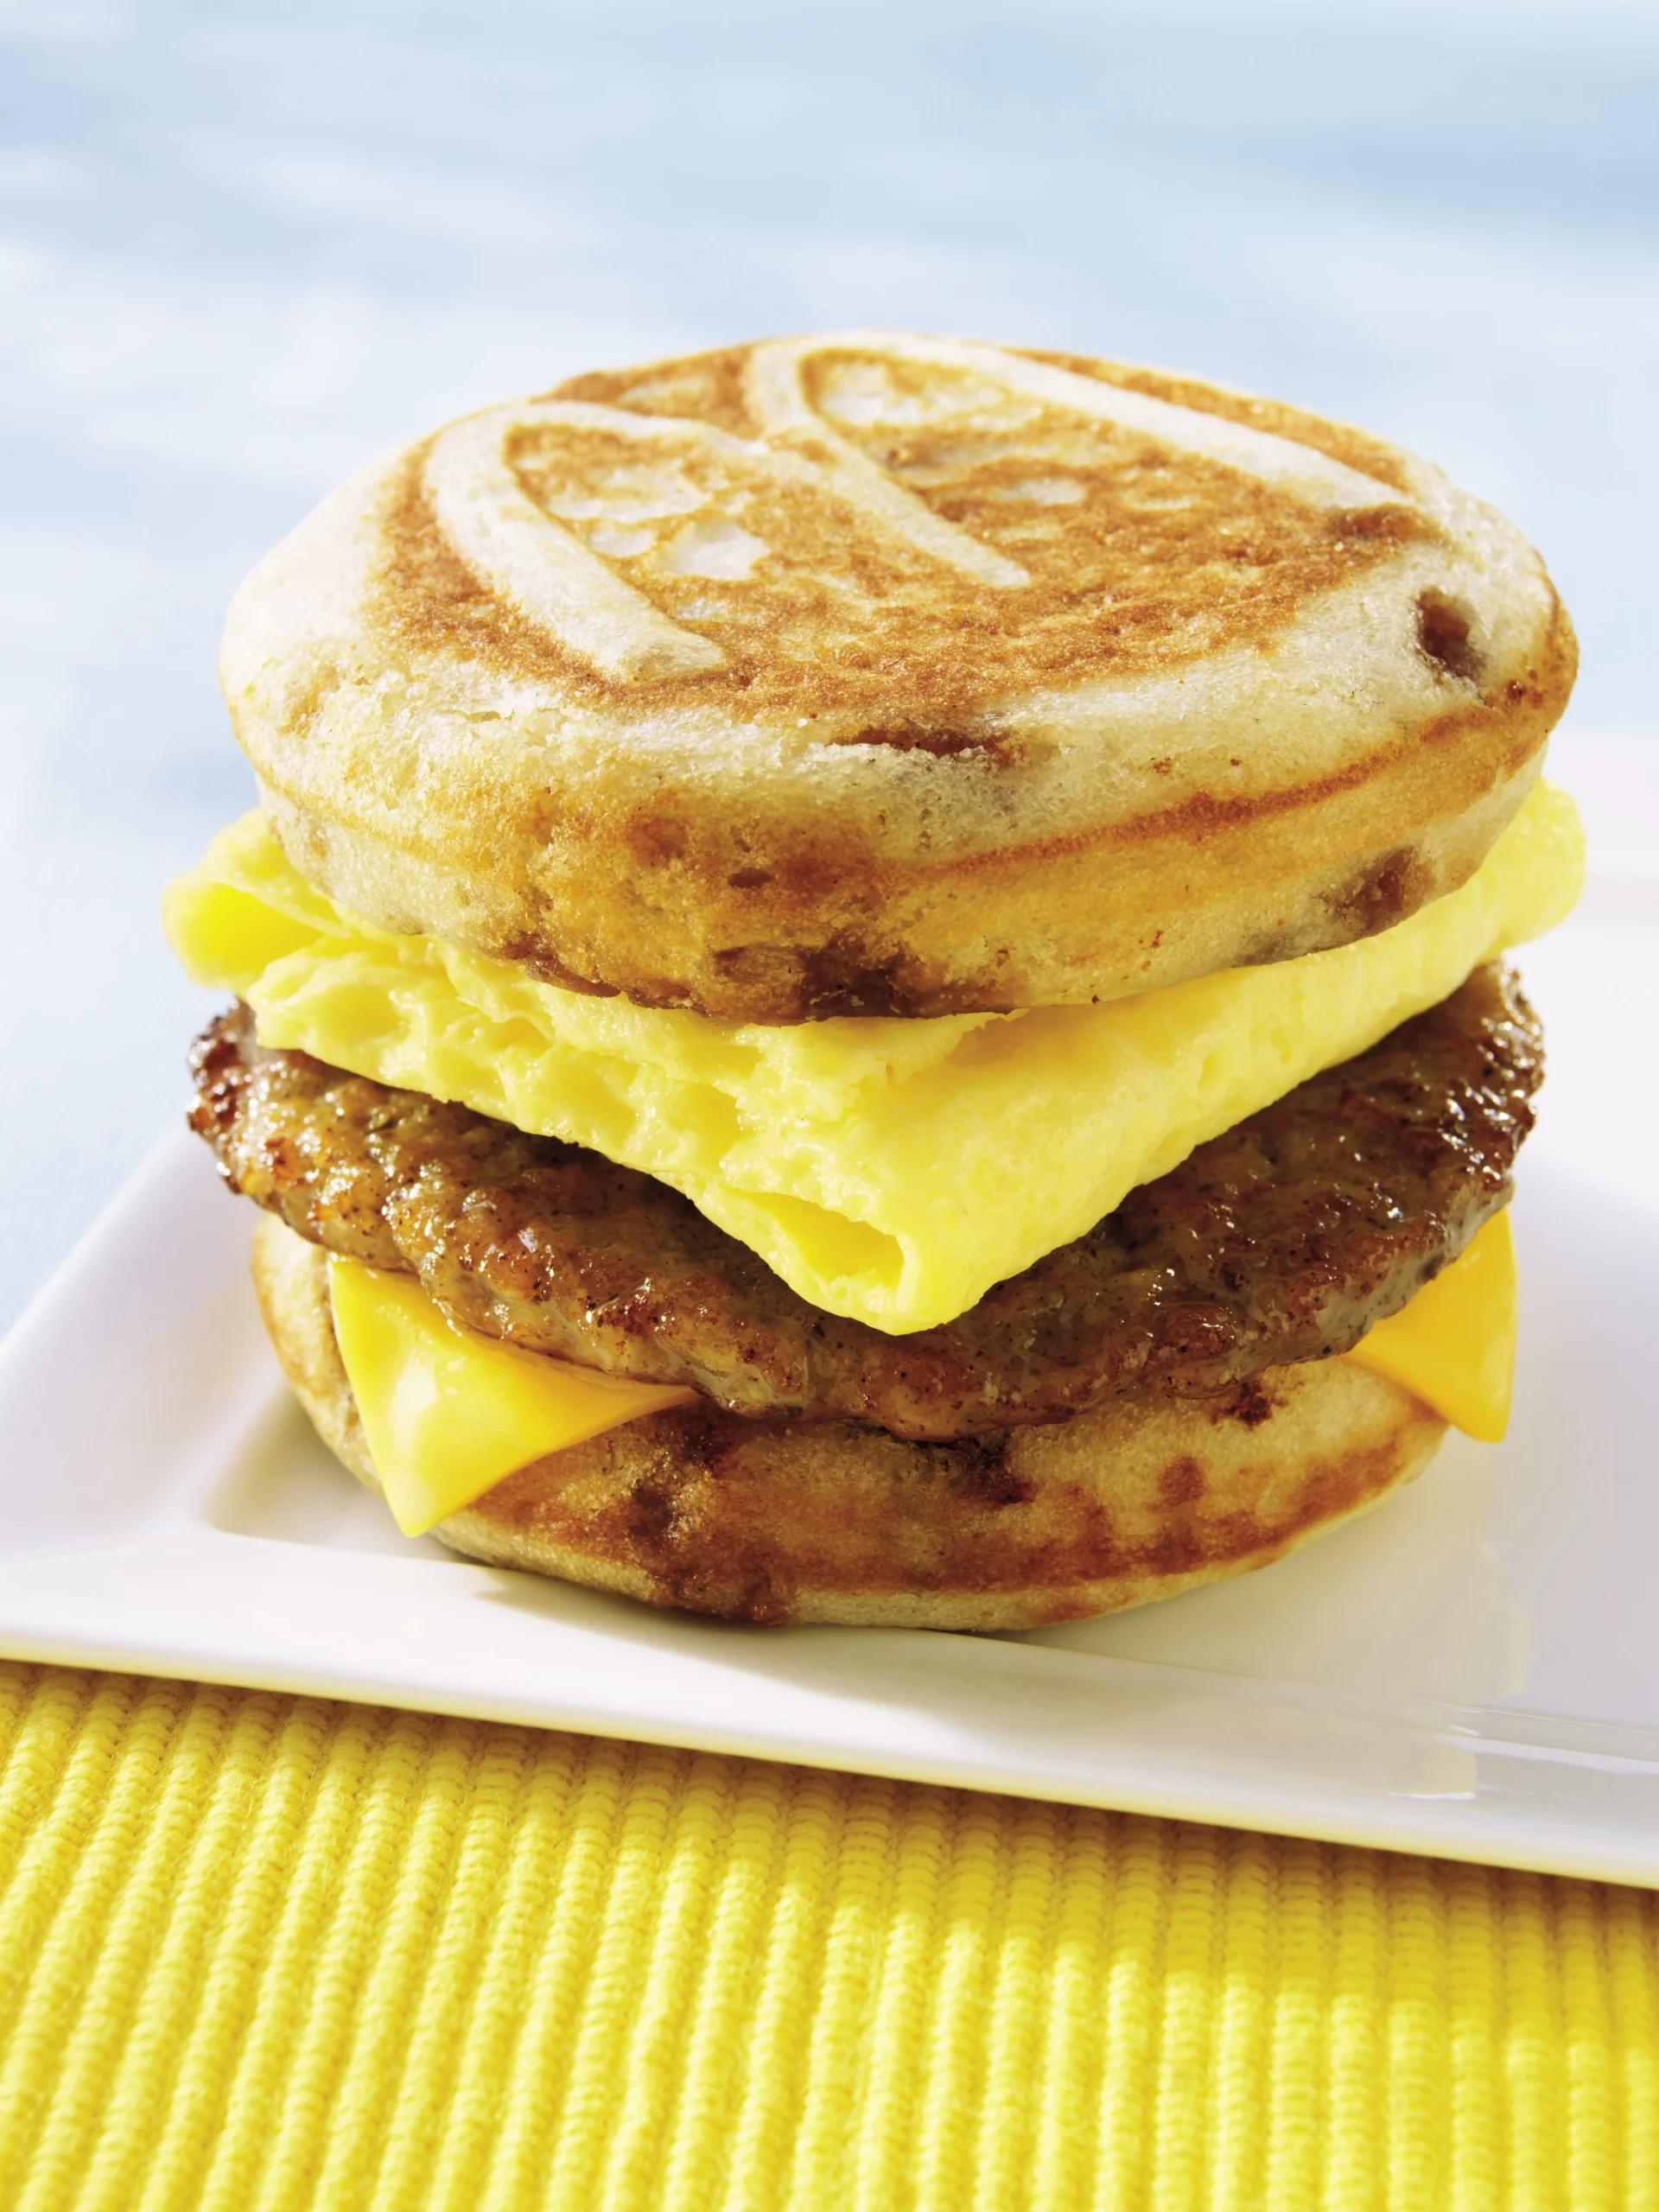 The All-Day McGriddles are Back at McDonald's - Lemon Film